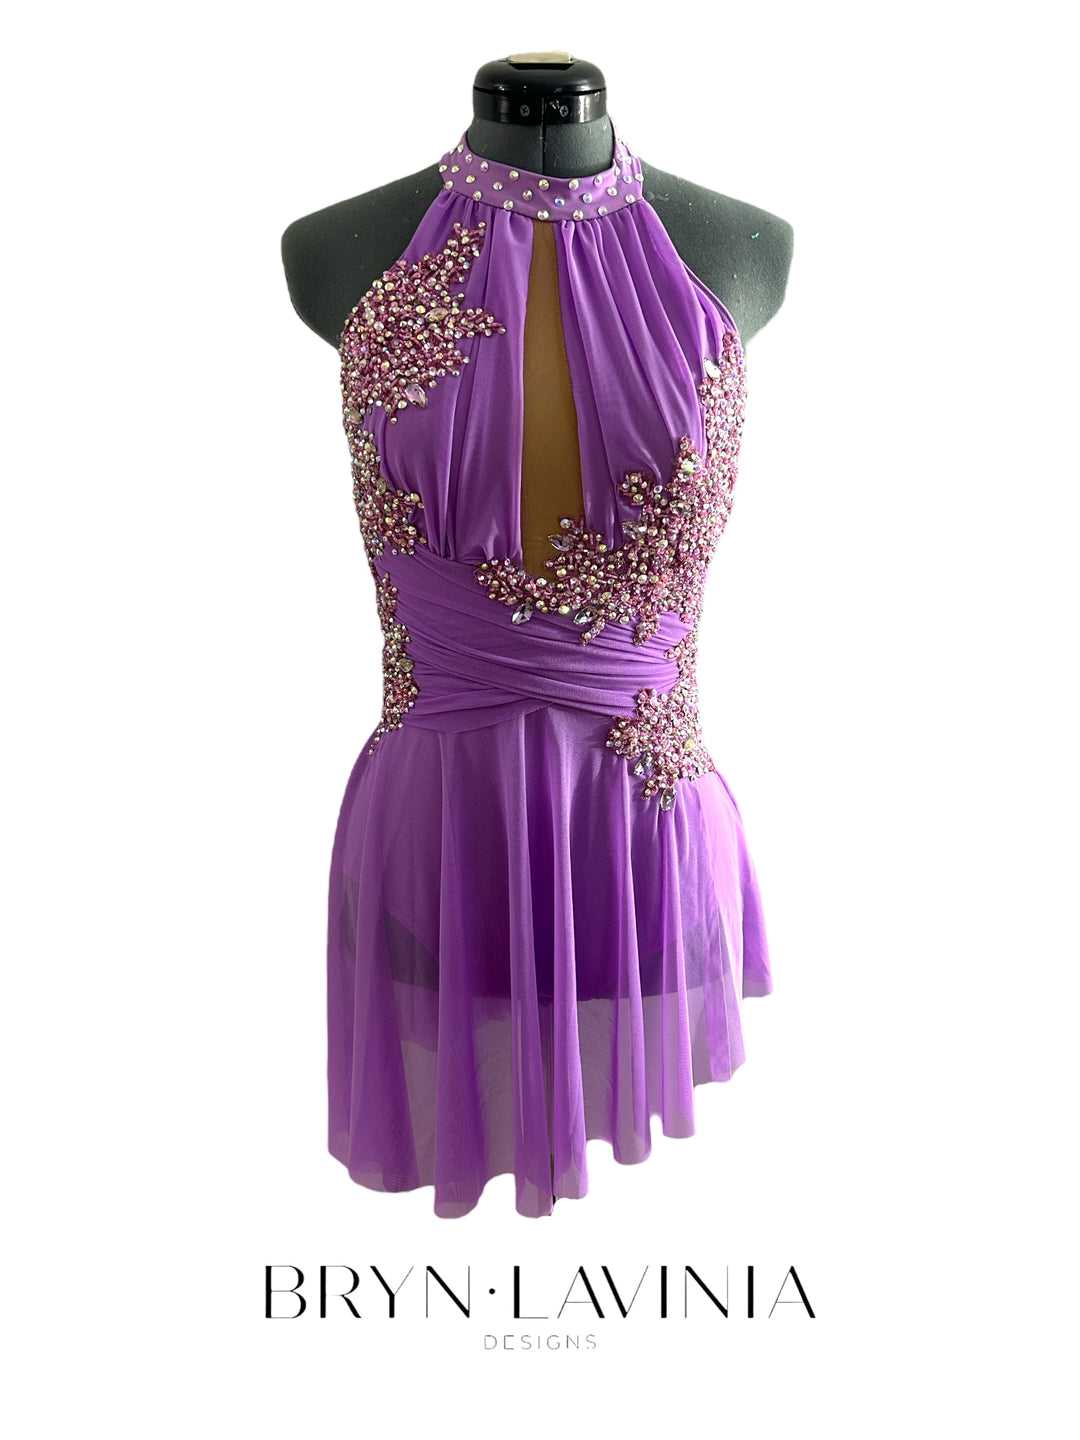 NEW Adult Small orchid purple ready to ship costume